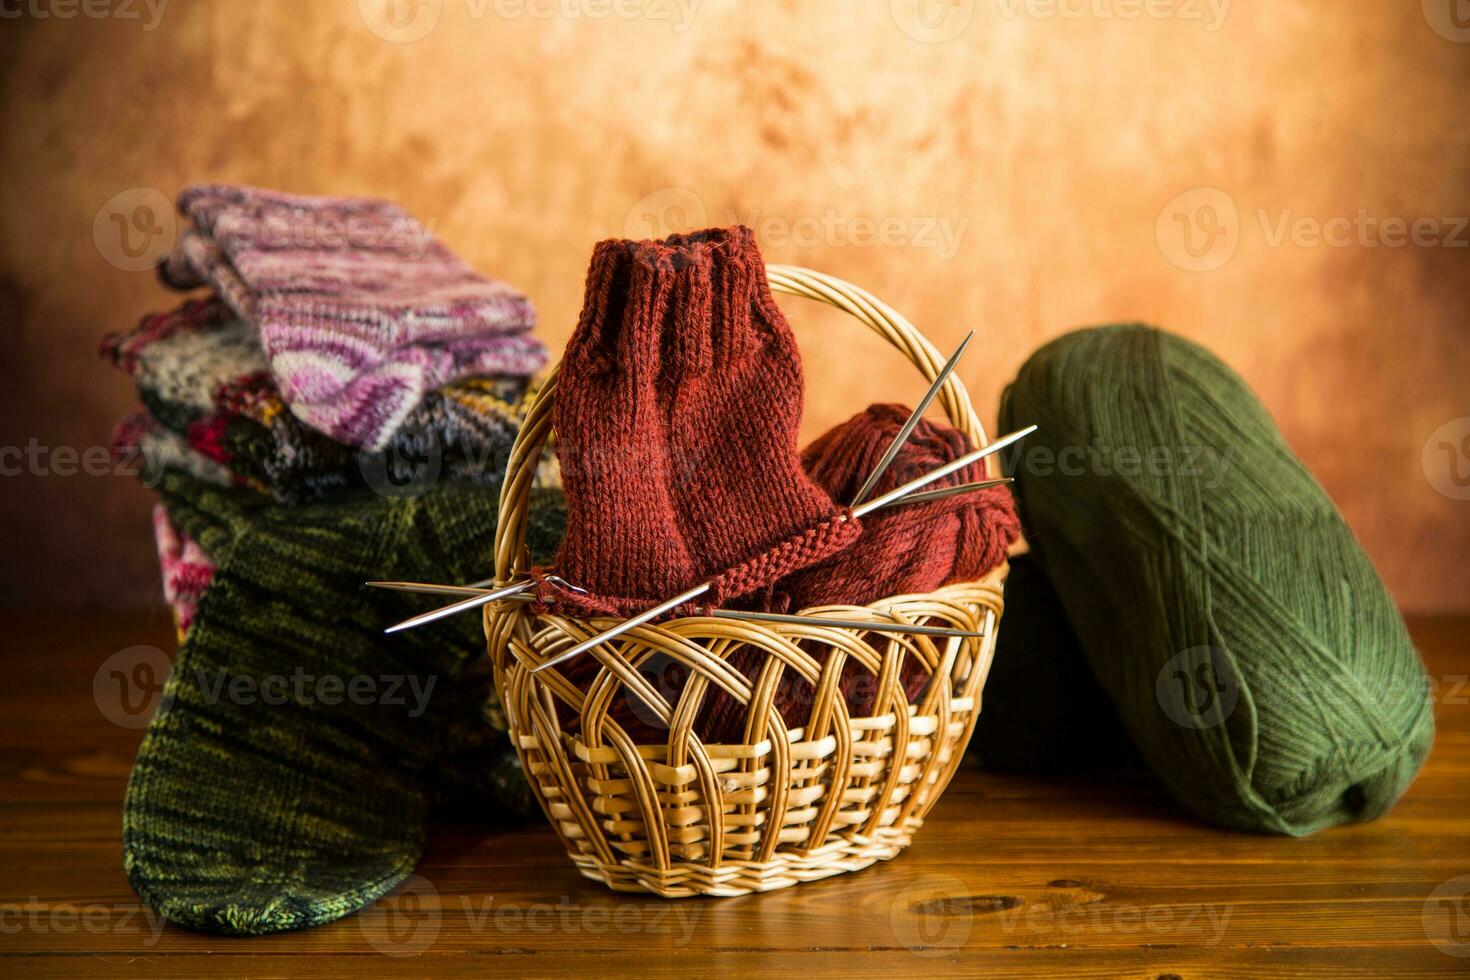 Colored yarn, knitting needles and other items for hand knitting . photo